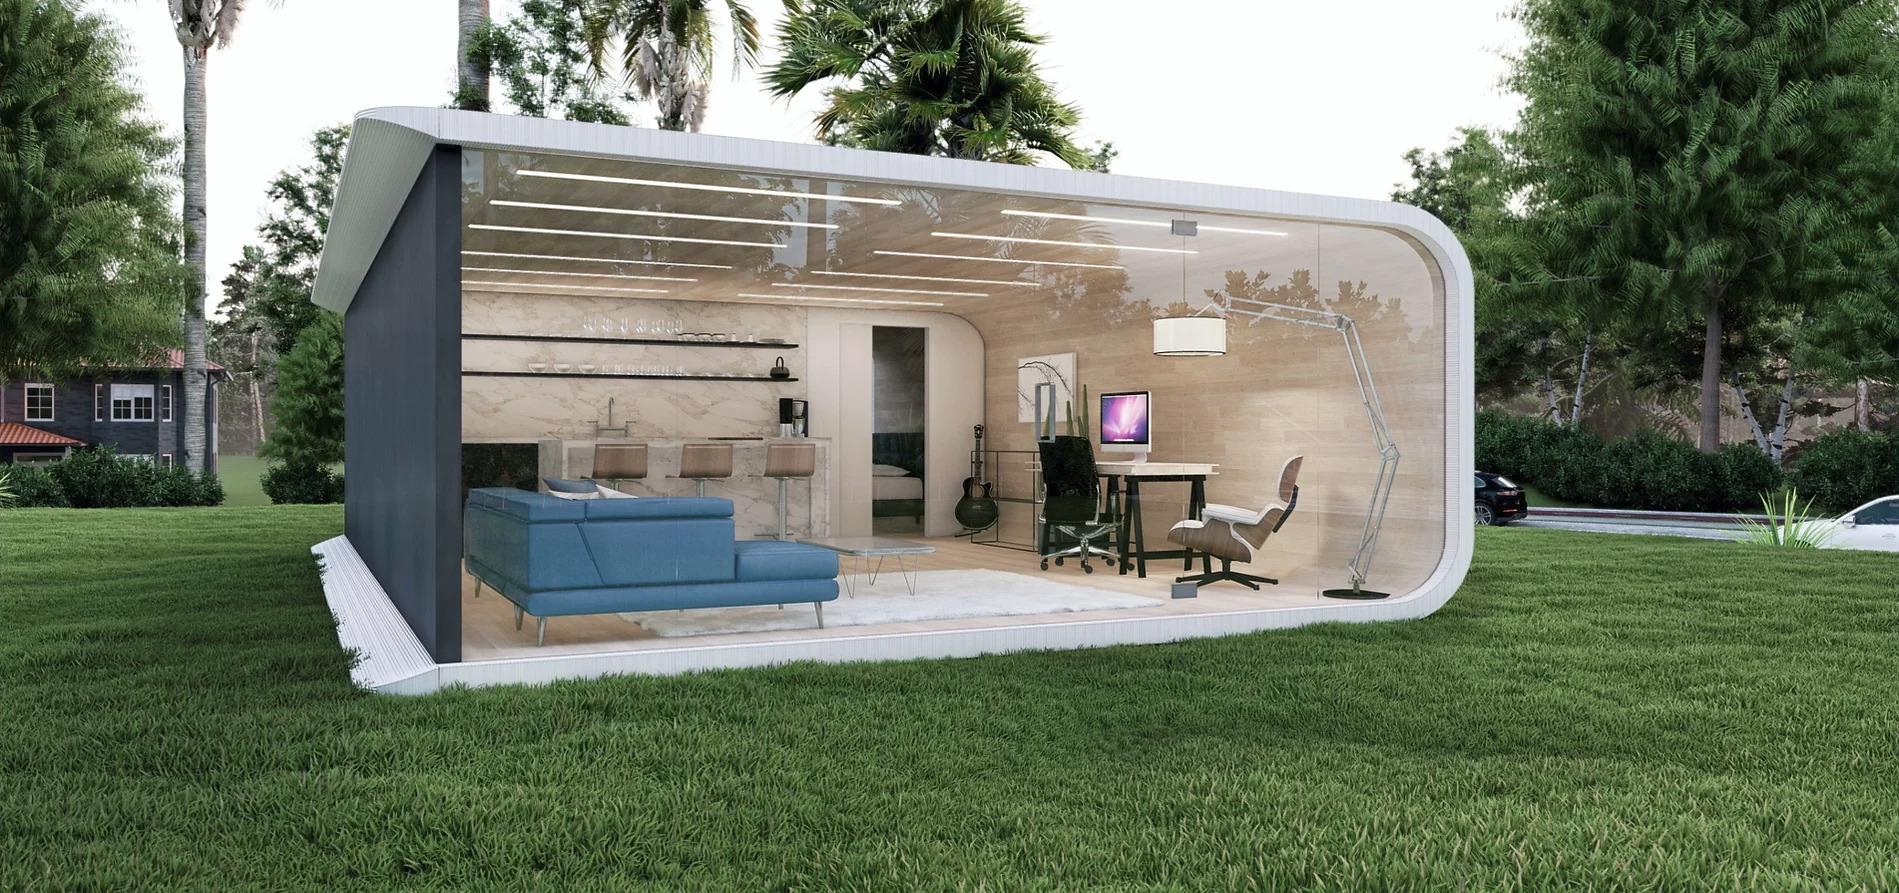 A Startup Builds Backyard Studio Homes With Recycled Plastic